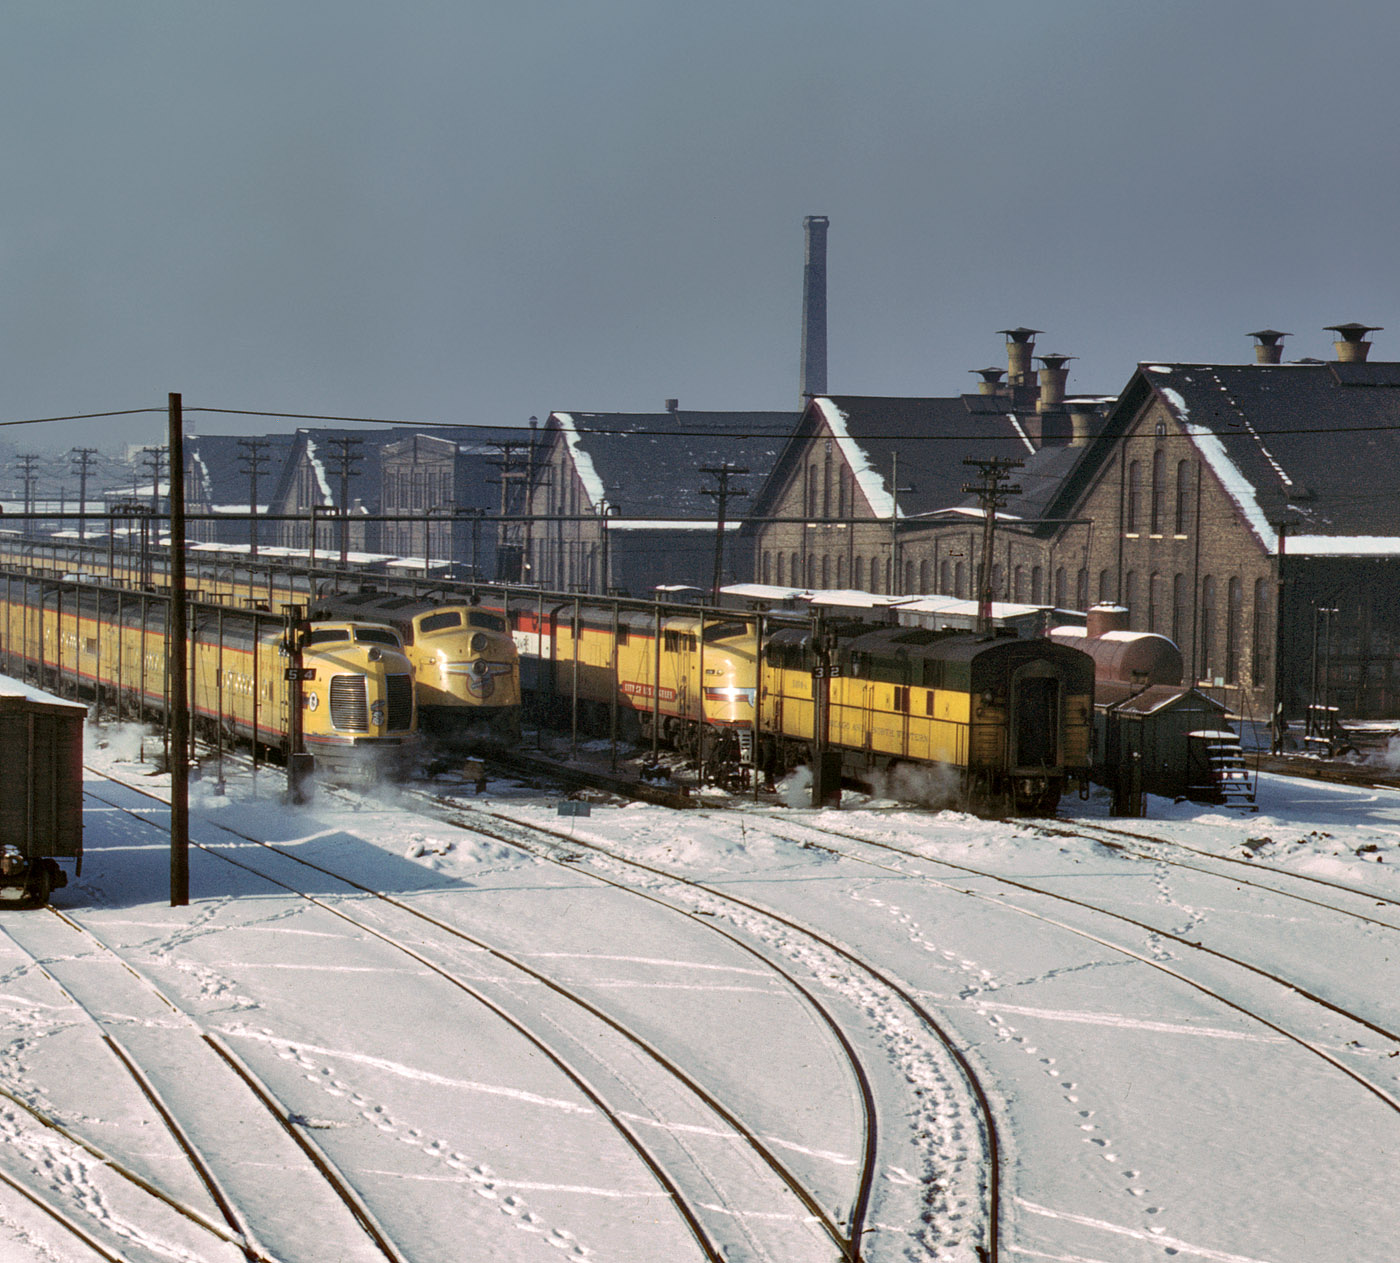 Detail from Jack Delano's shot of the C&NW railyards in December 1942, and streamliners City of Denver and City of Los Angeles. View full size.